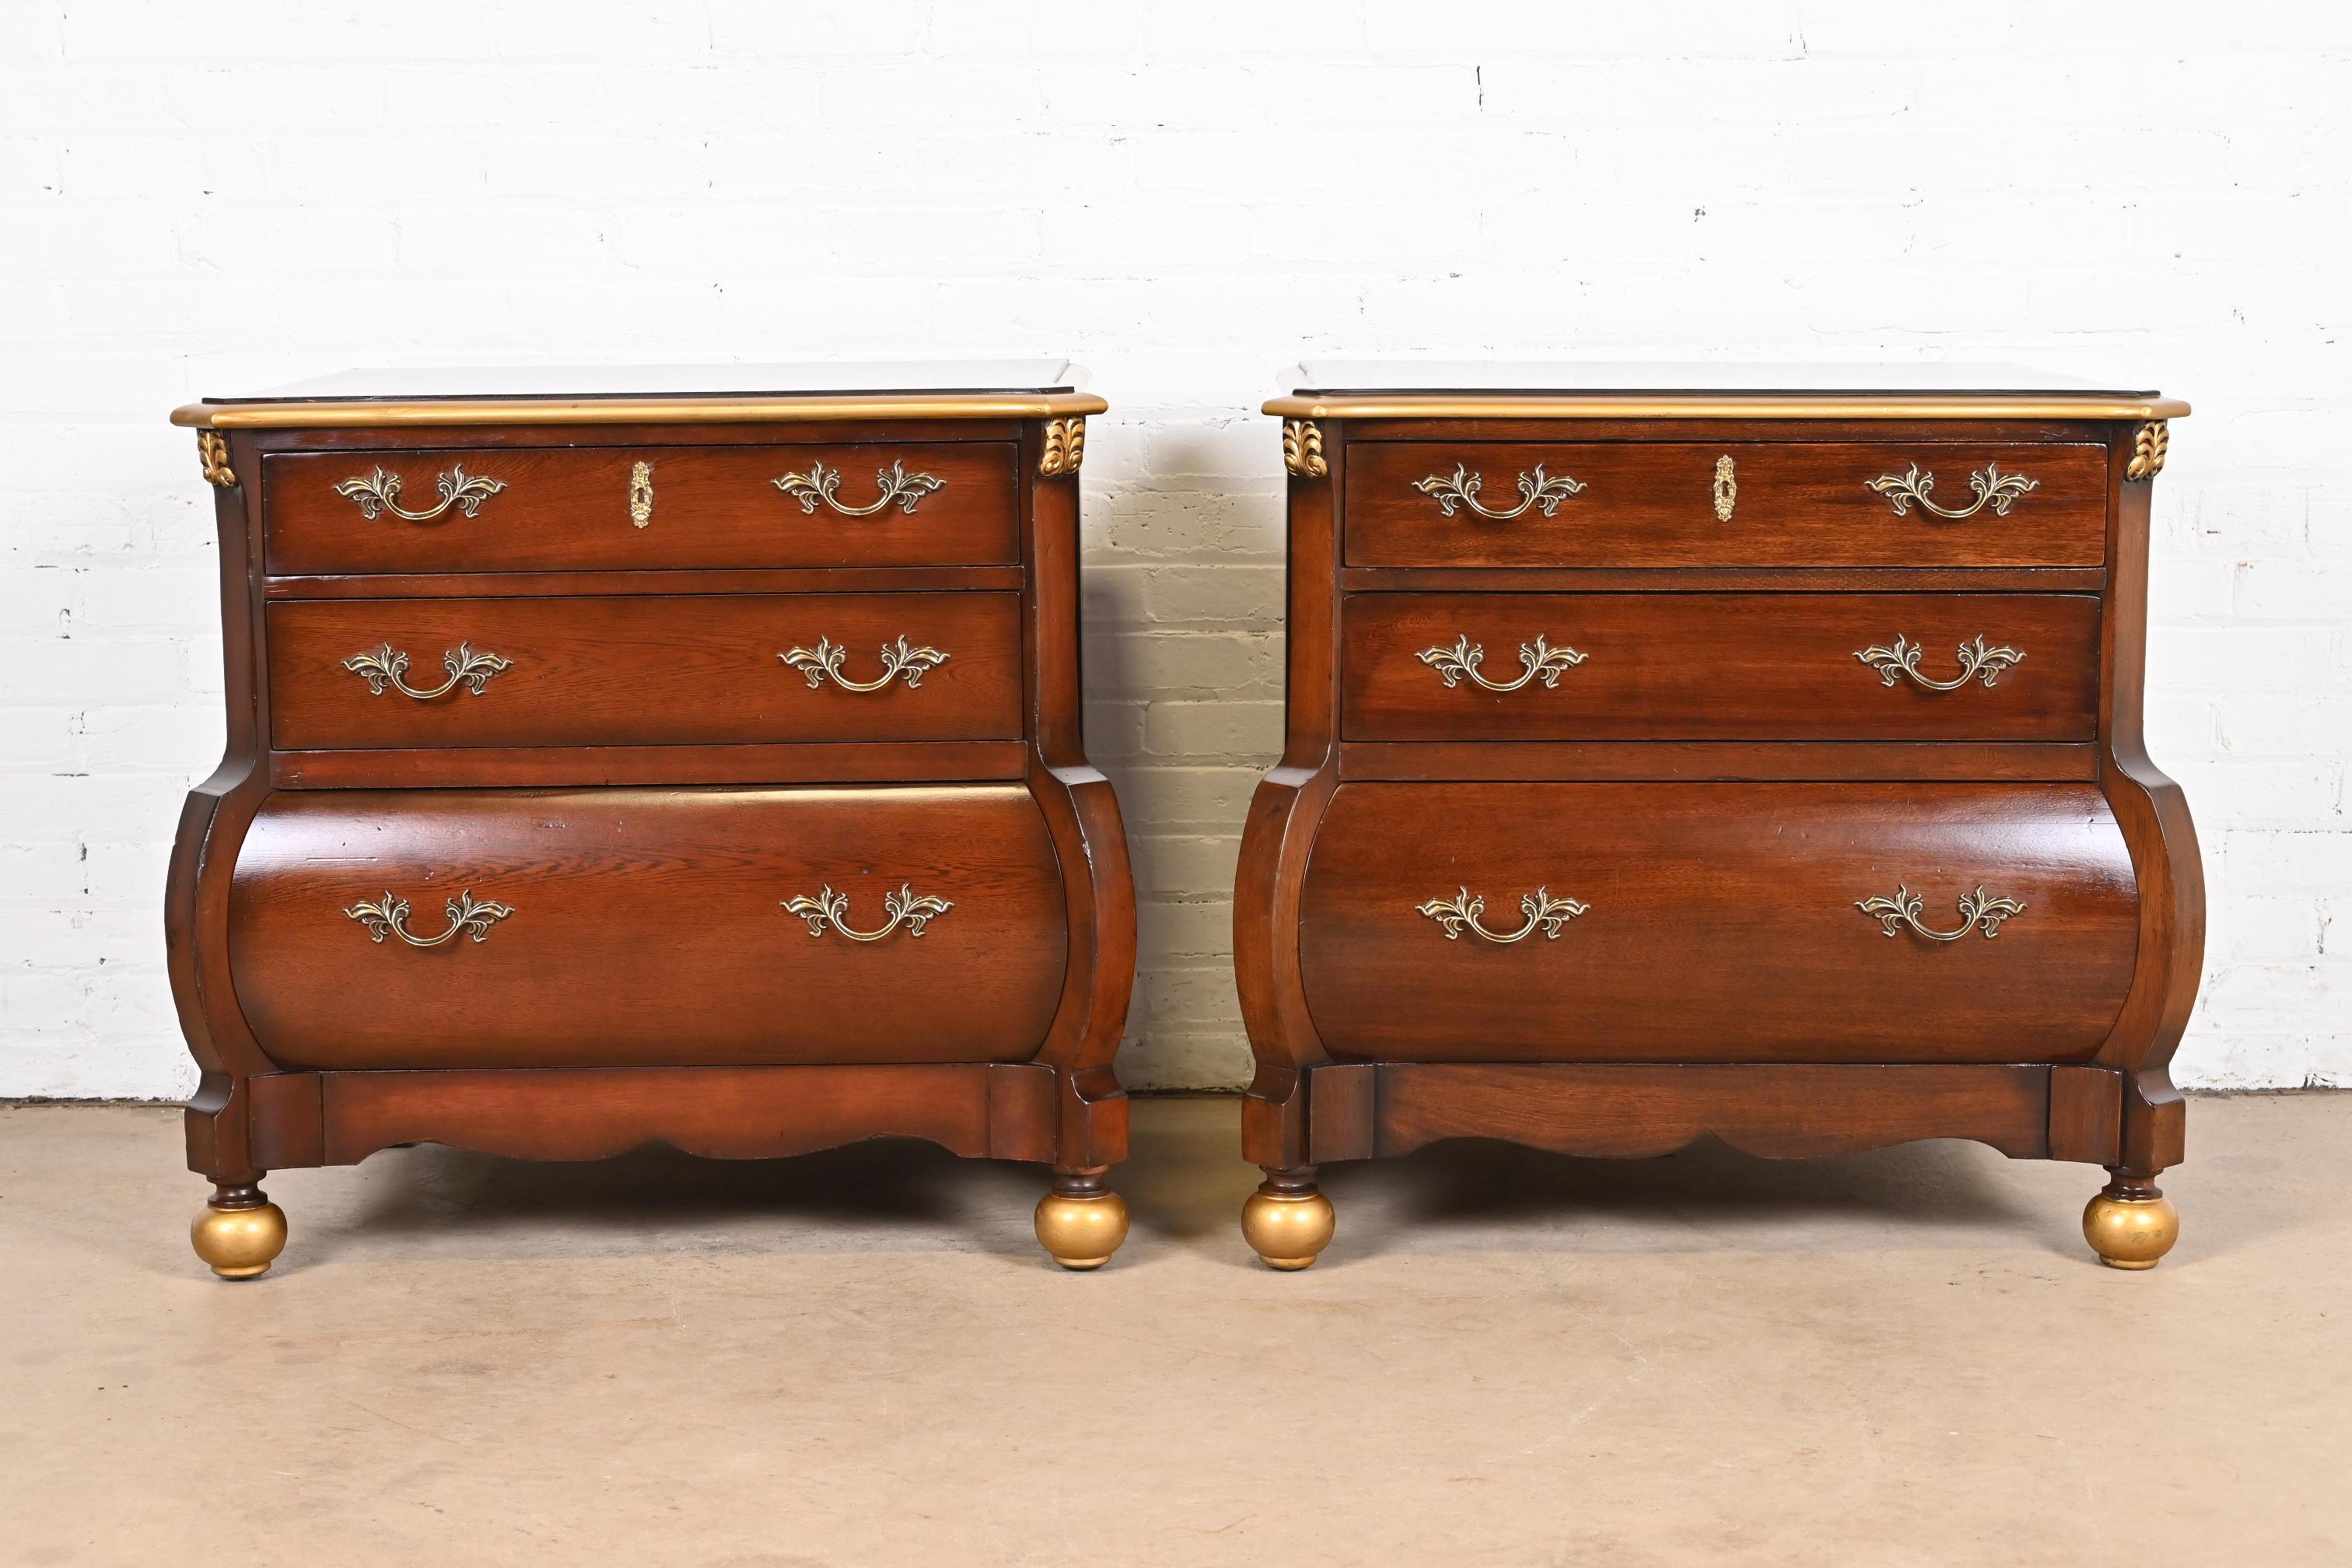 A gorgeous pair of Italian or French Provincial Louis XV style bombay chest commodes or nightstands

By Ralph Lauren

Colombia, late 20th century

Mahogany, with gold gilt details, and original brass hardware.

Measures: 30.75